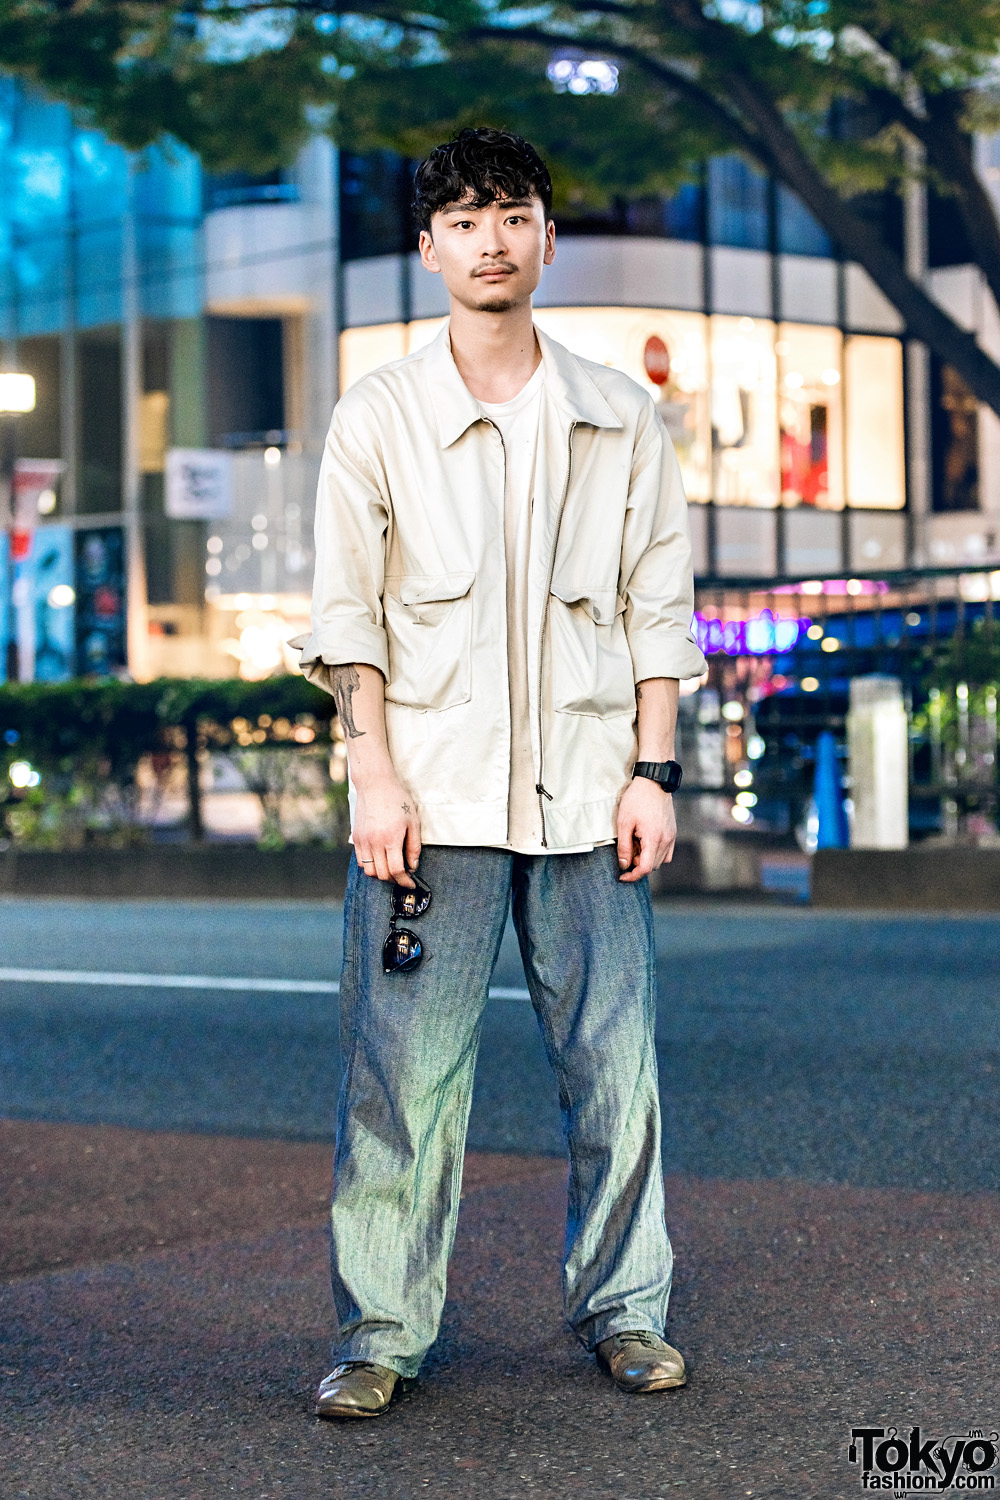 Japanese Hair Stylist in Casual Minimalist Menswear Fashion w/ Journal Standard Parka & Chevron Patterned Pants, Plain White Tee & Vintage Lace-Up Loafers